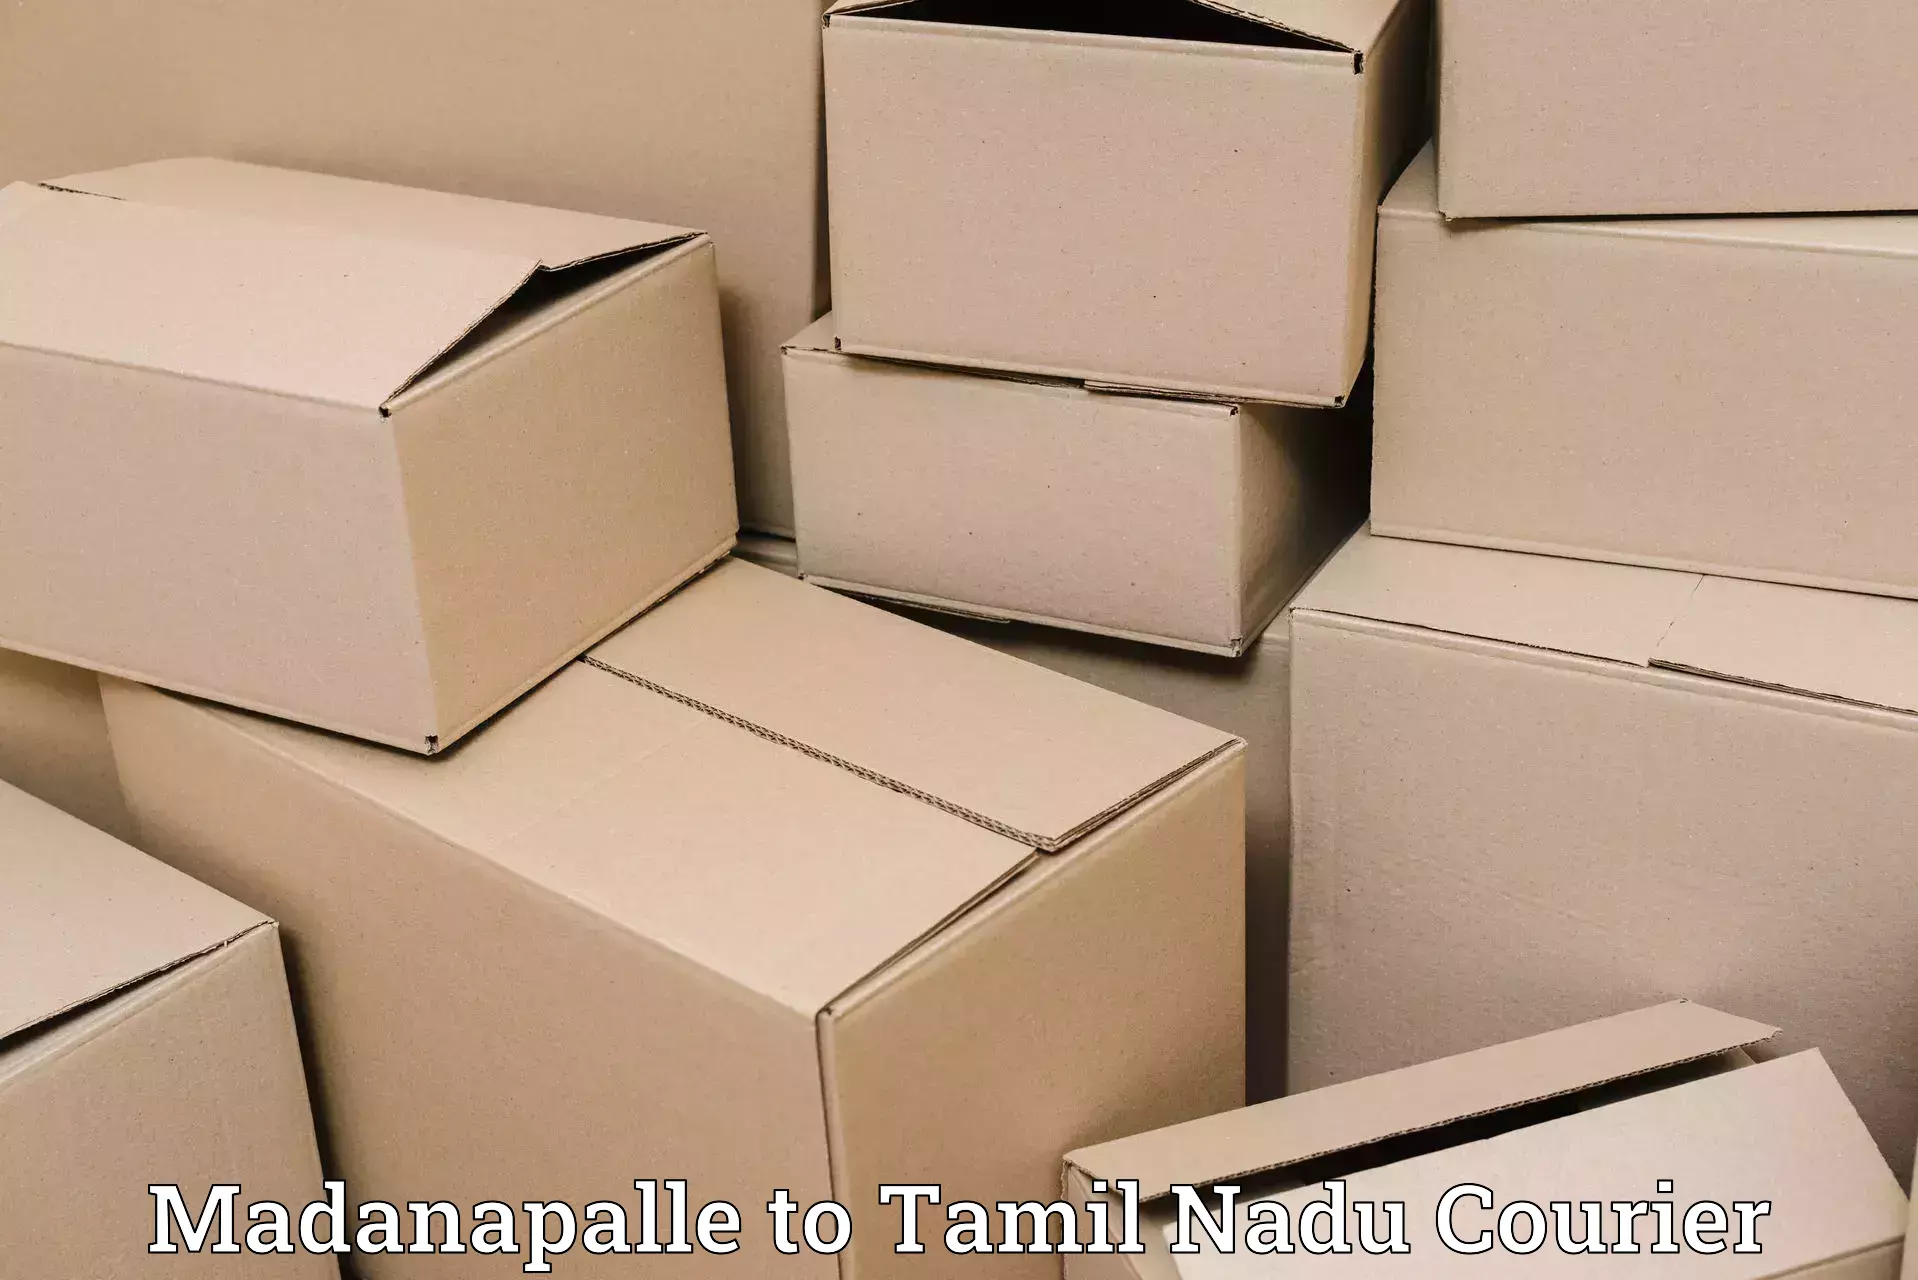 Nationwide delivery network Madanapalle to Ennore Port Chennai